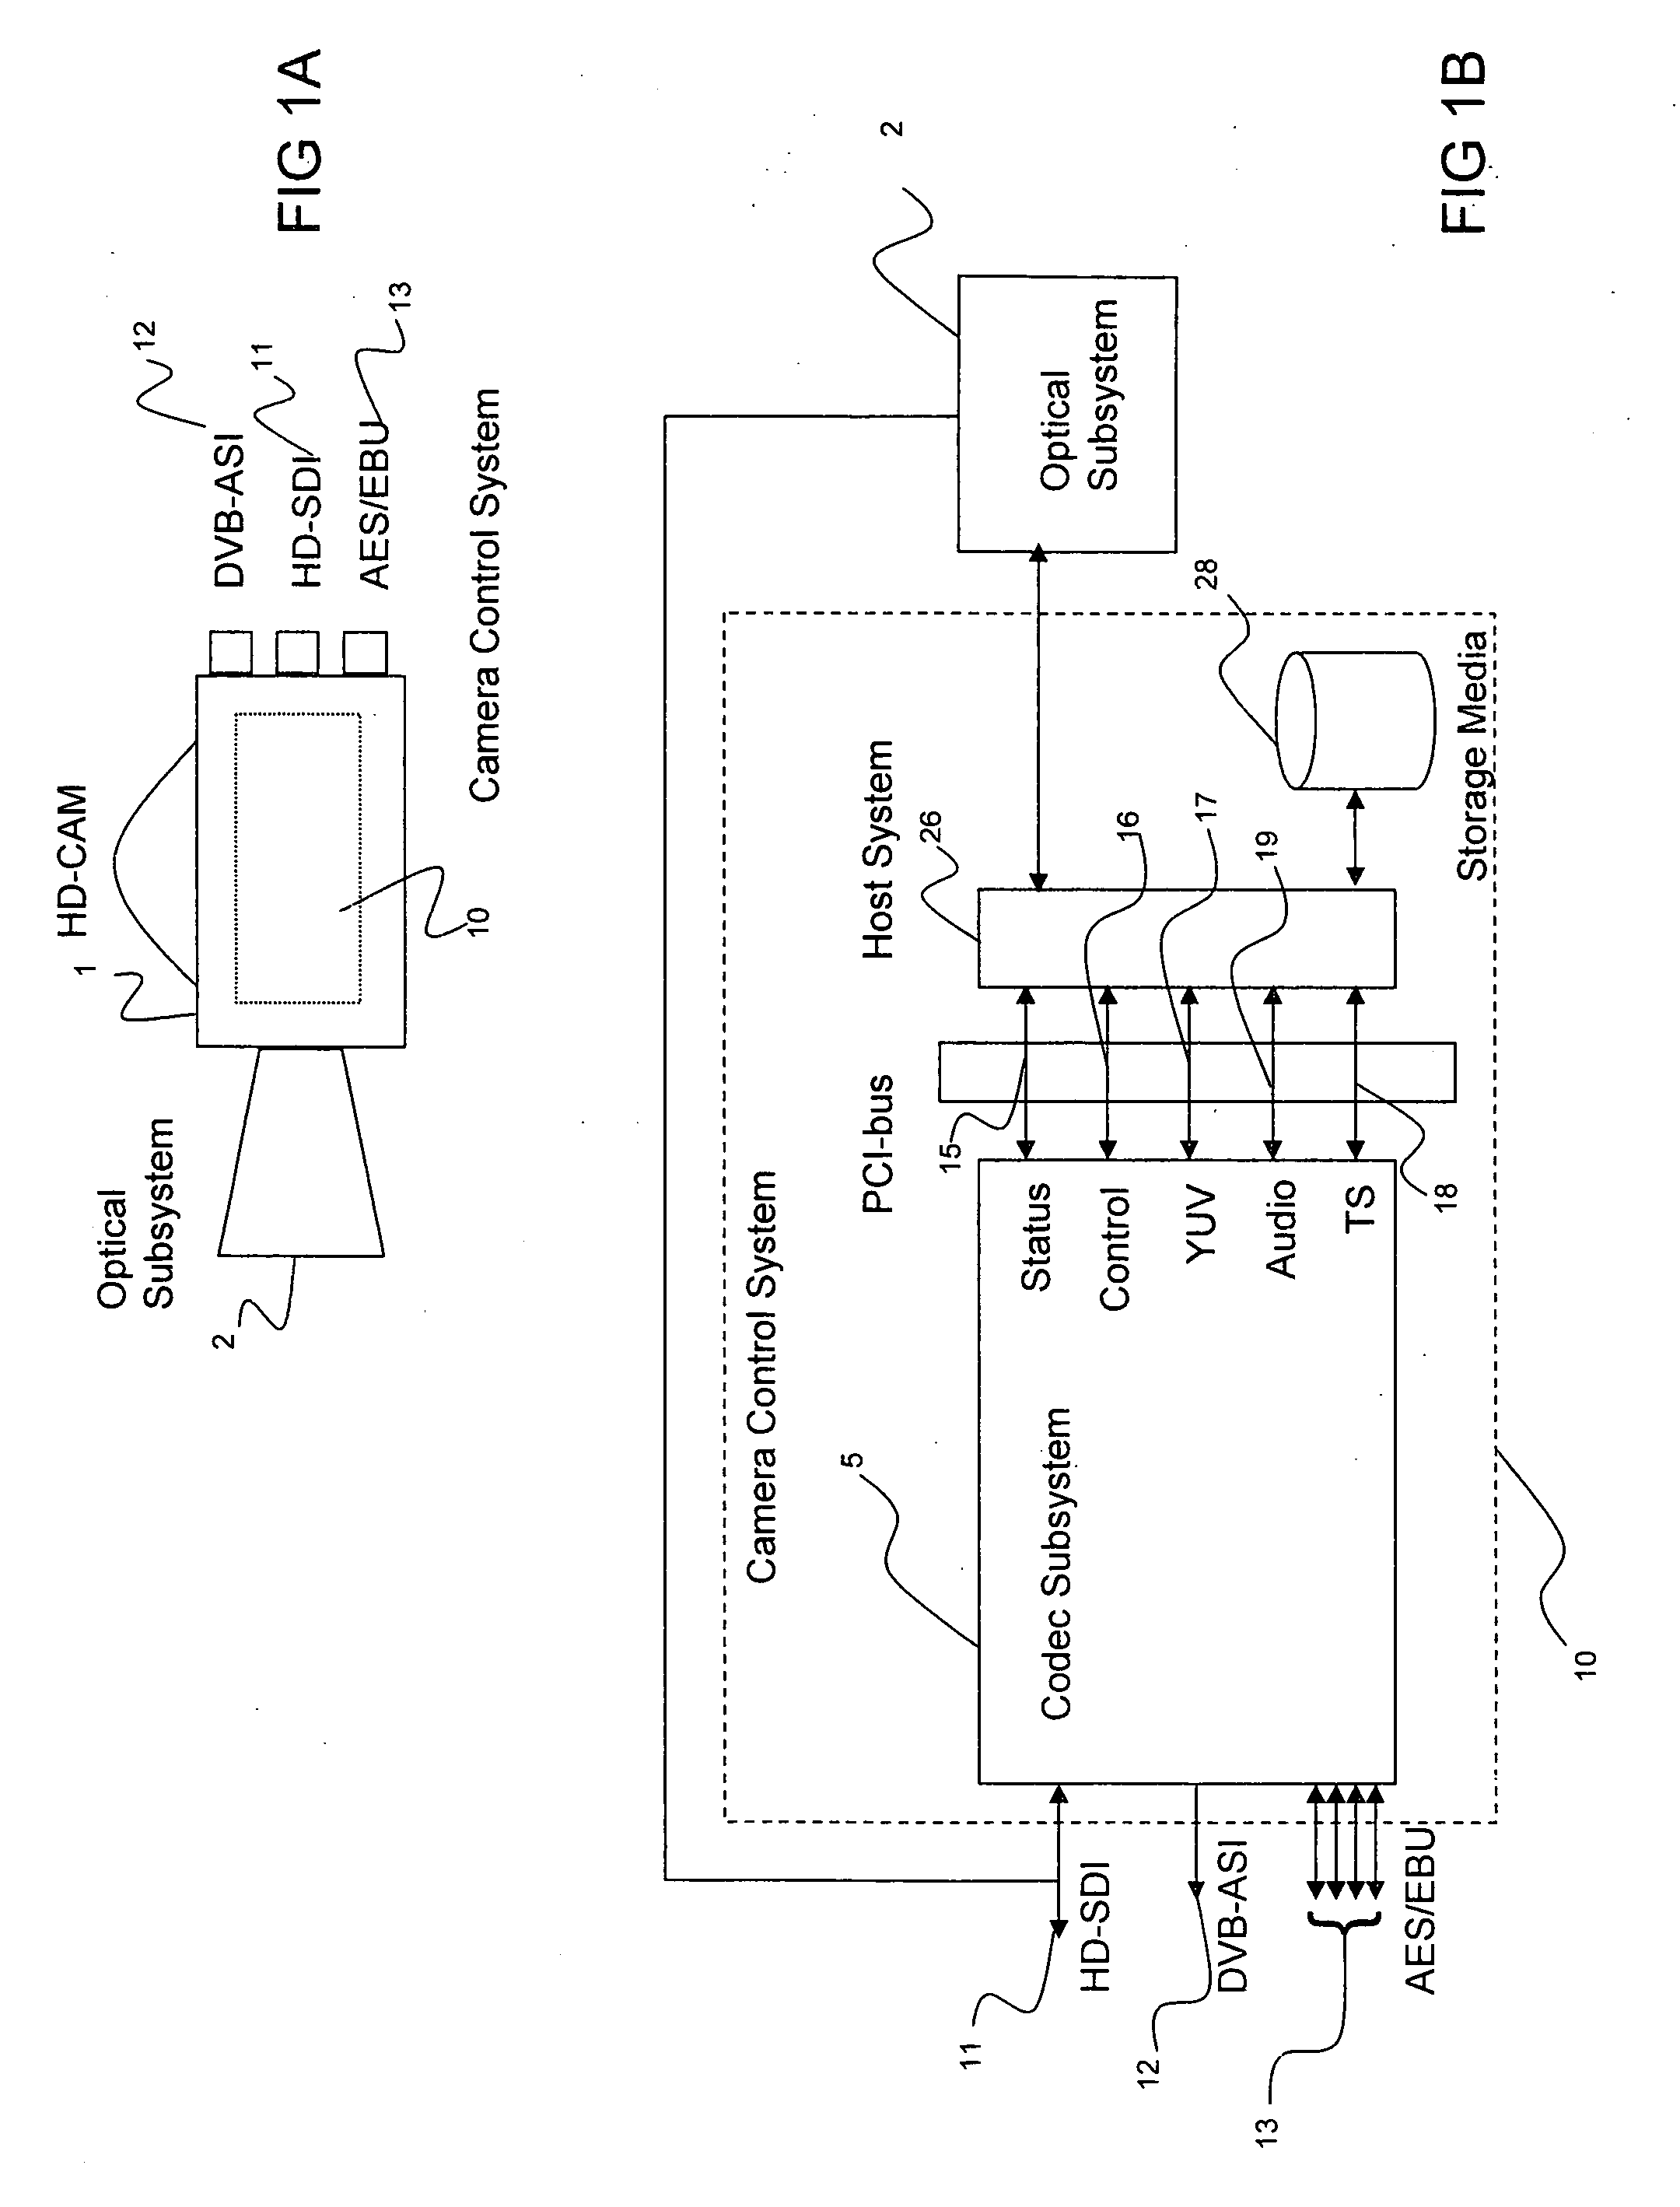 Flexible frame based energy efficient multimedia processor architecture and method